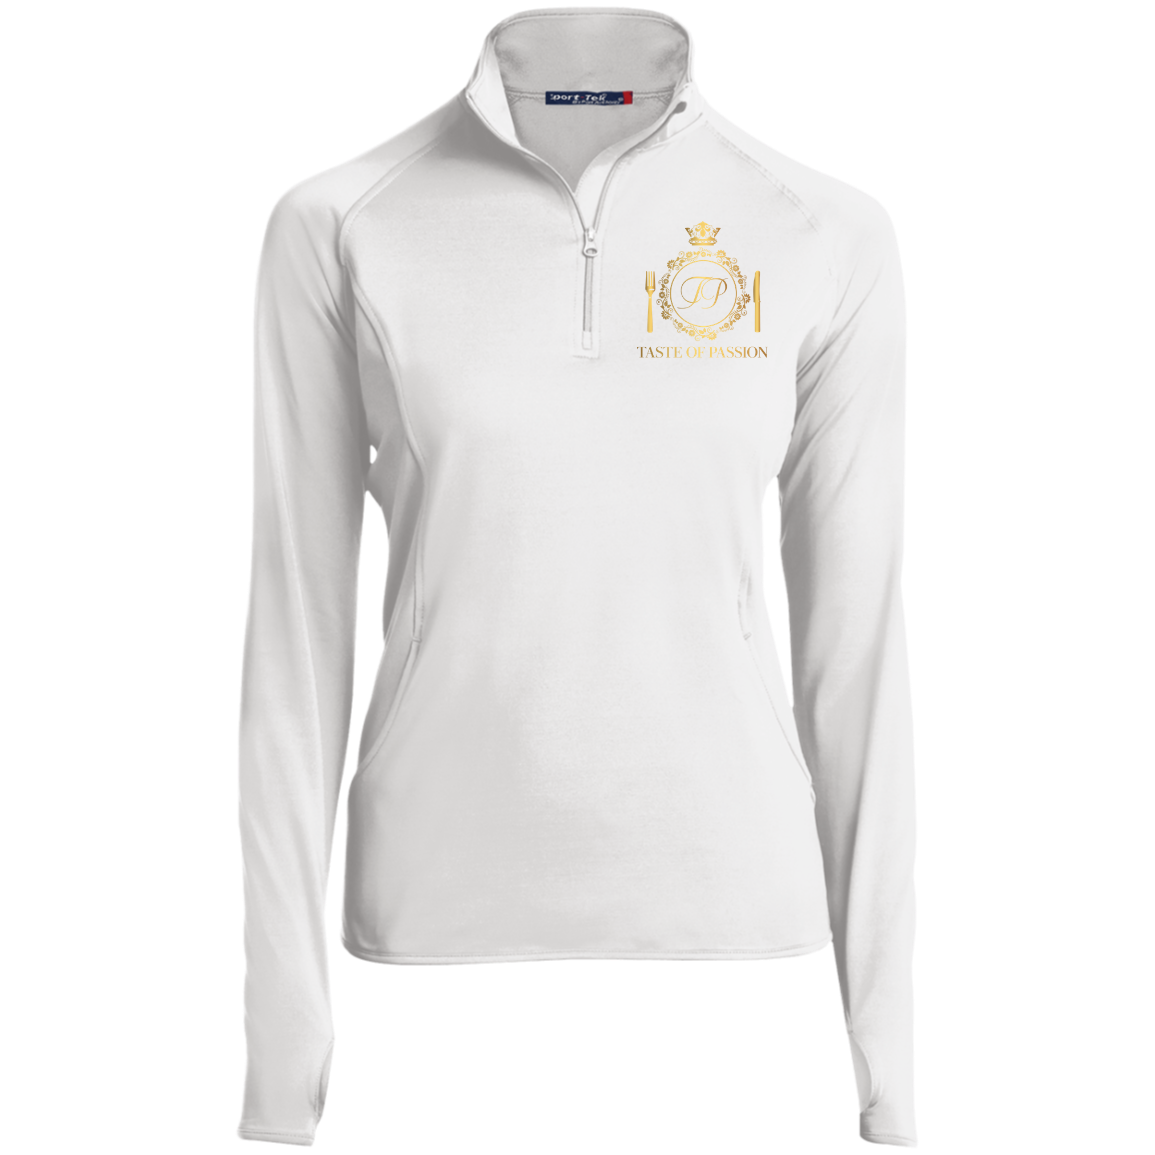 Taste of Passion Women's 1/2 Zip Performance Pullover